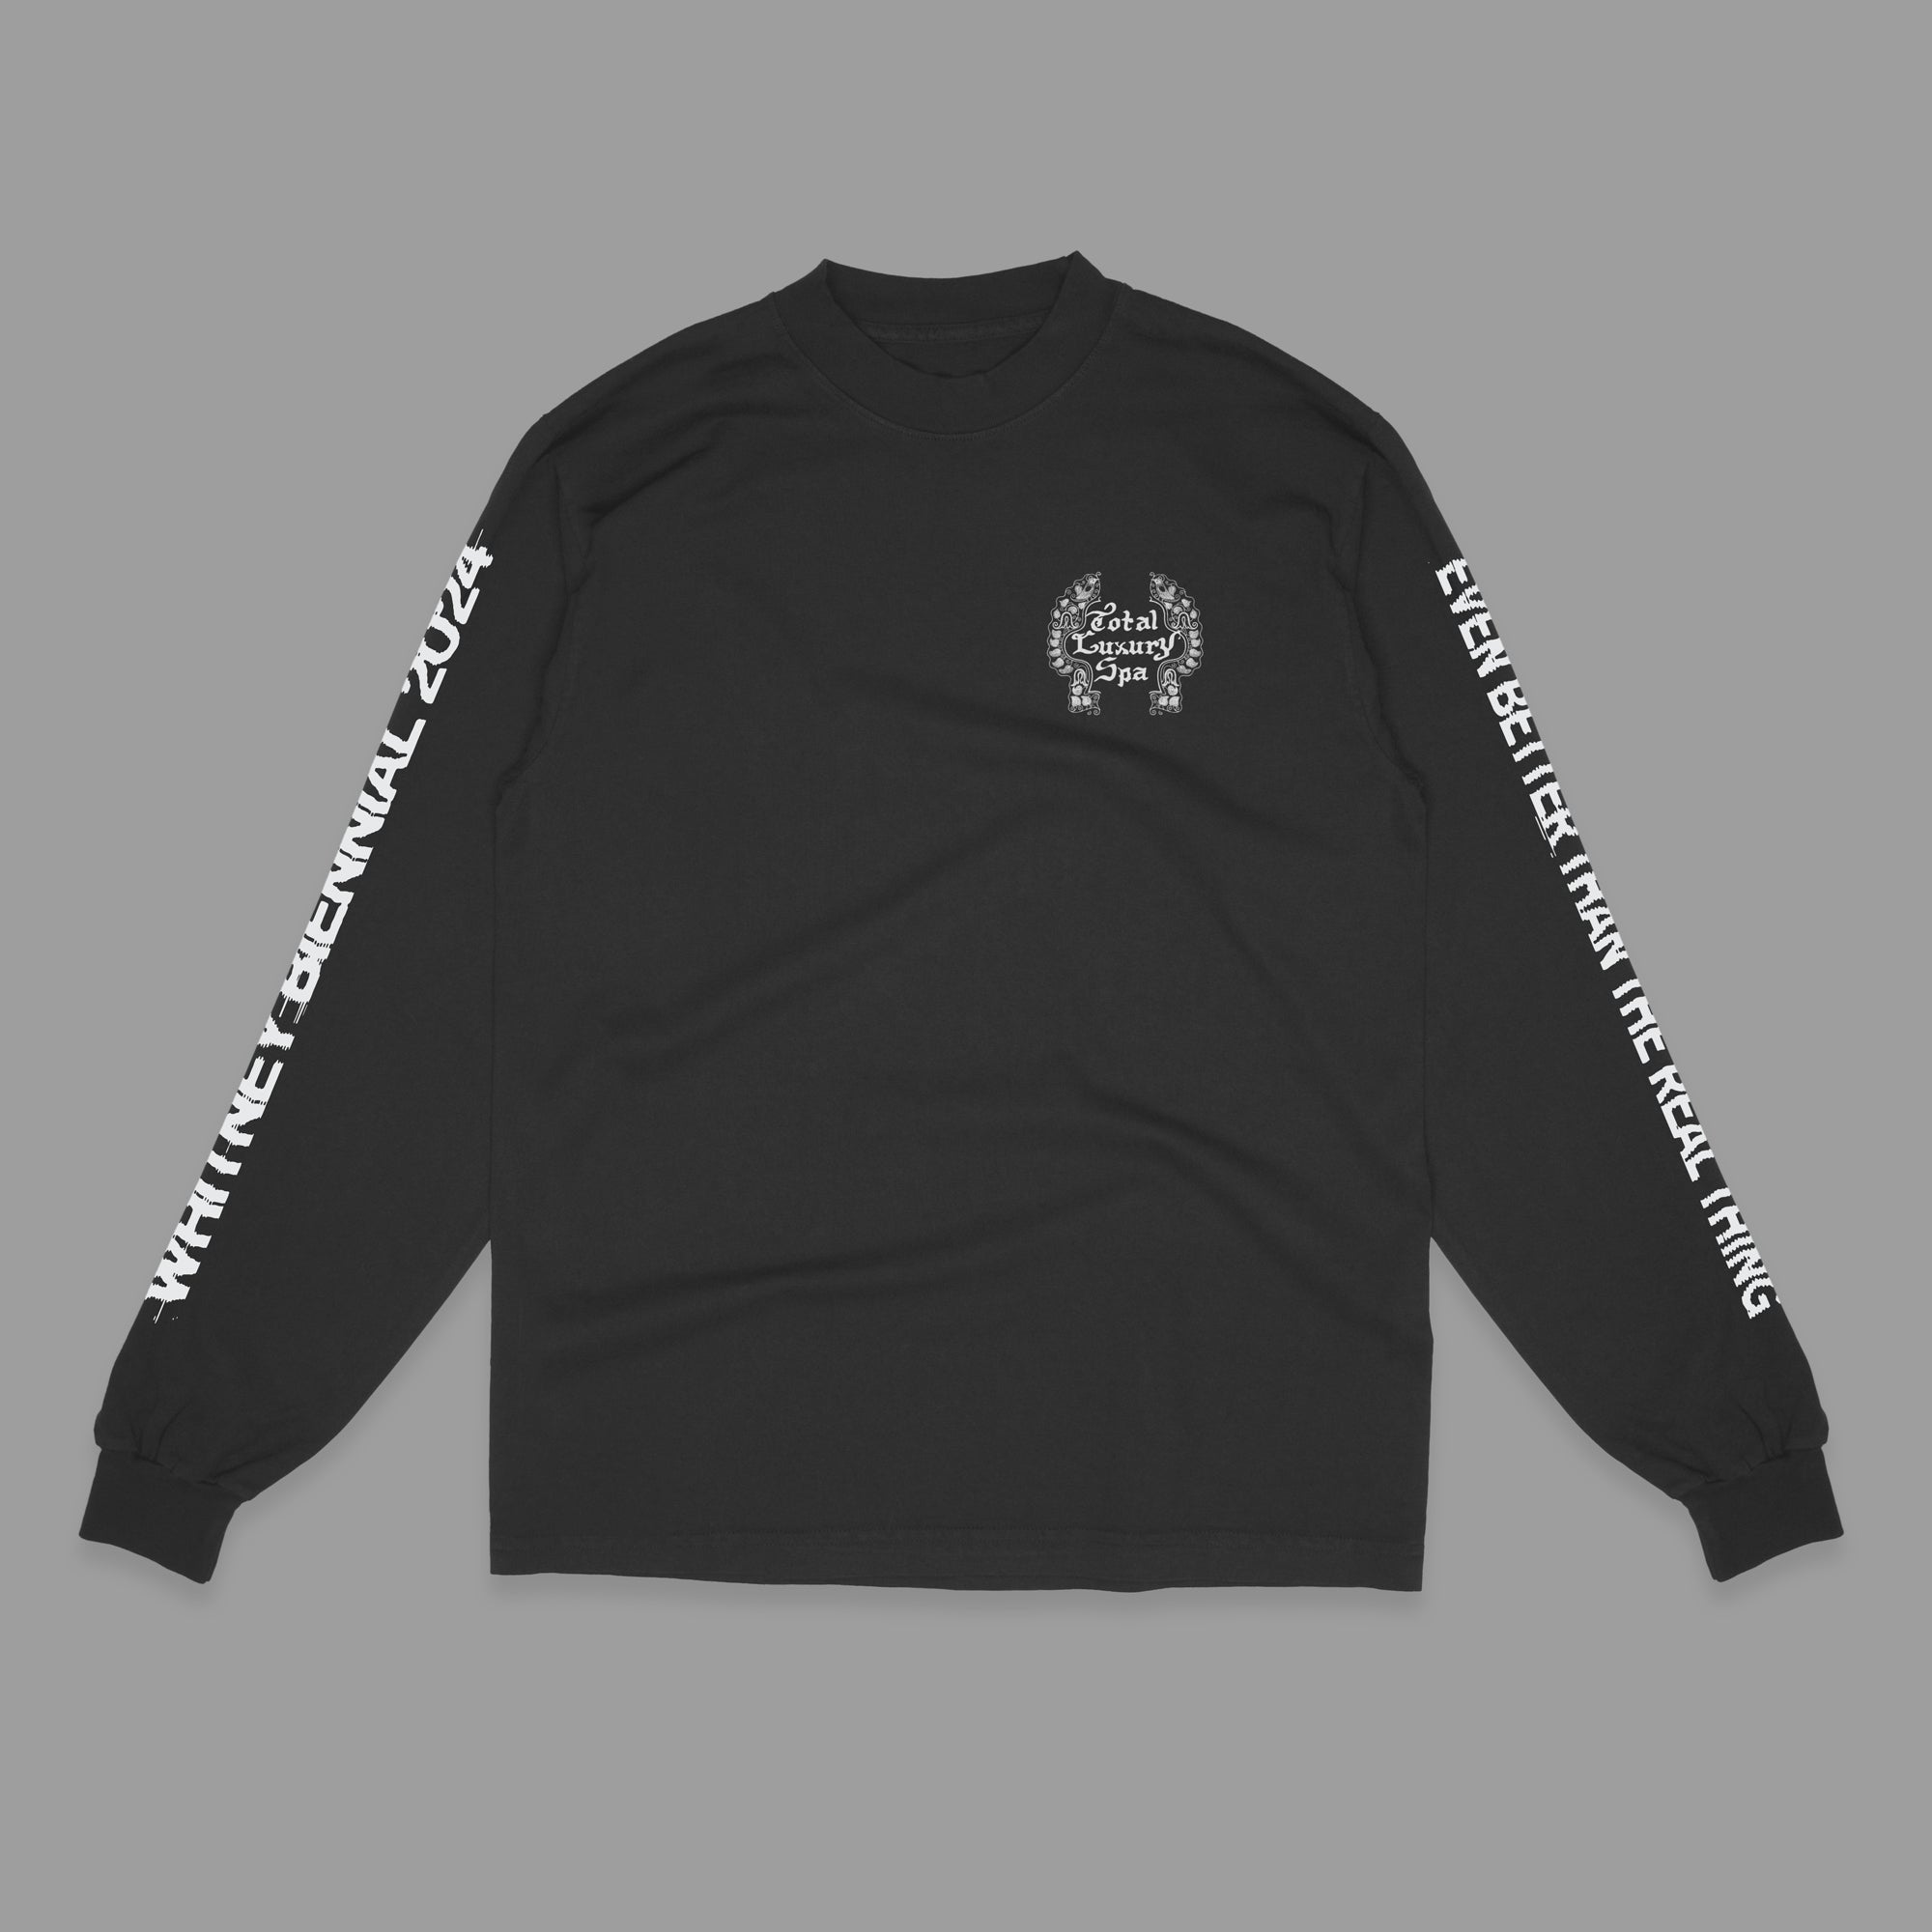 100% cotton black long sleeve t-shirt featuring white text and graphics on the Whitney Biennial 2024: Even Better Than The Real Thing